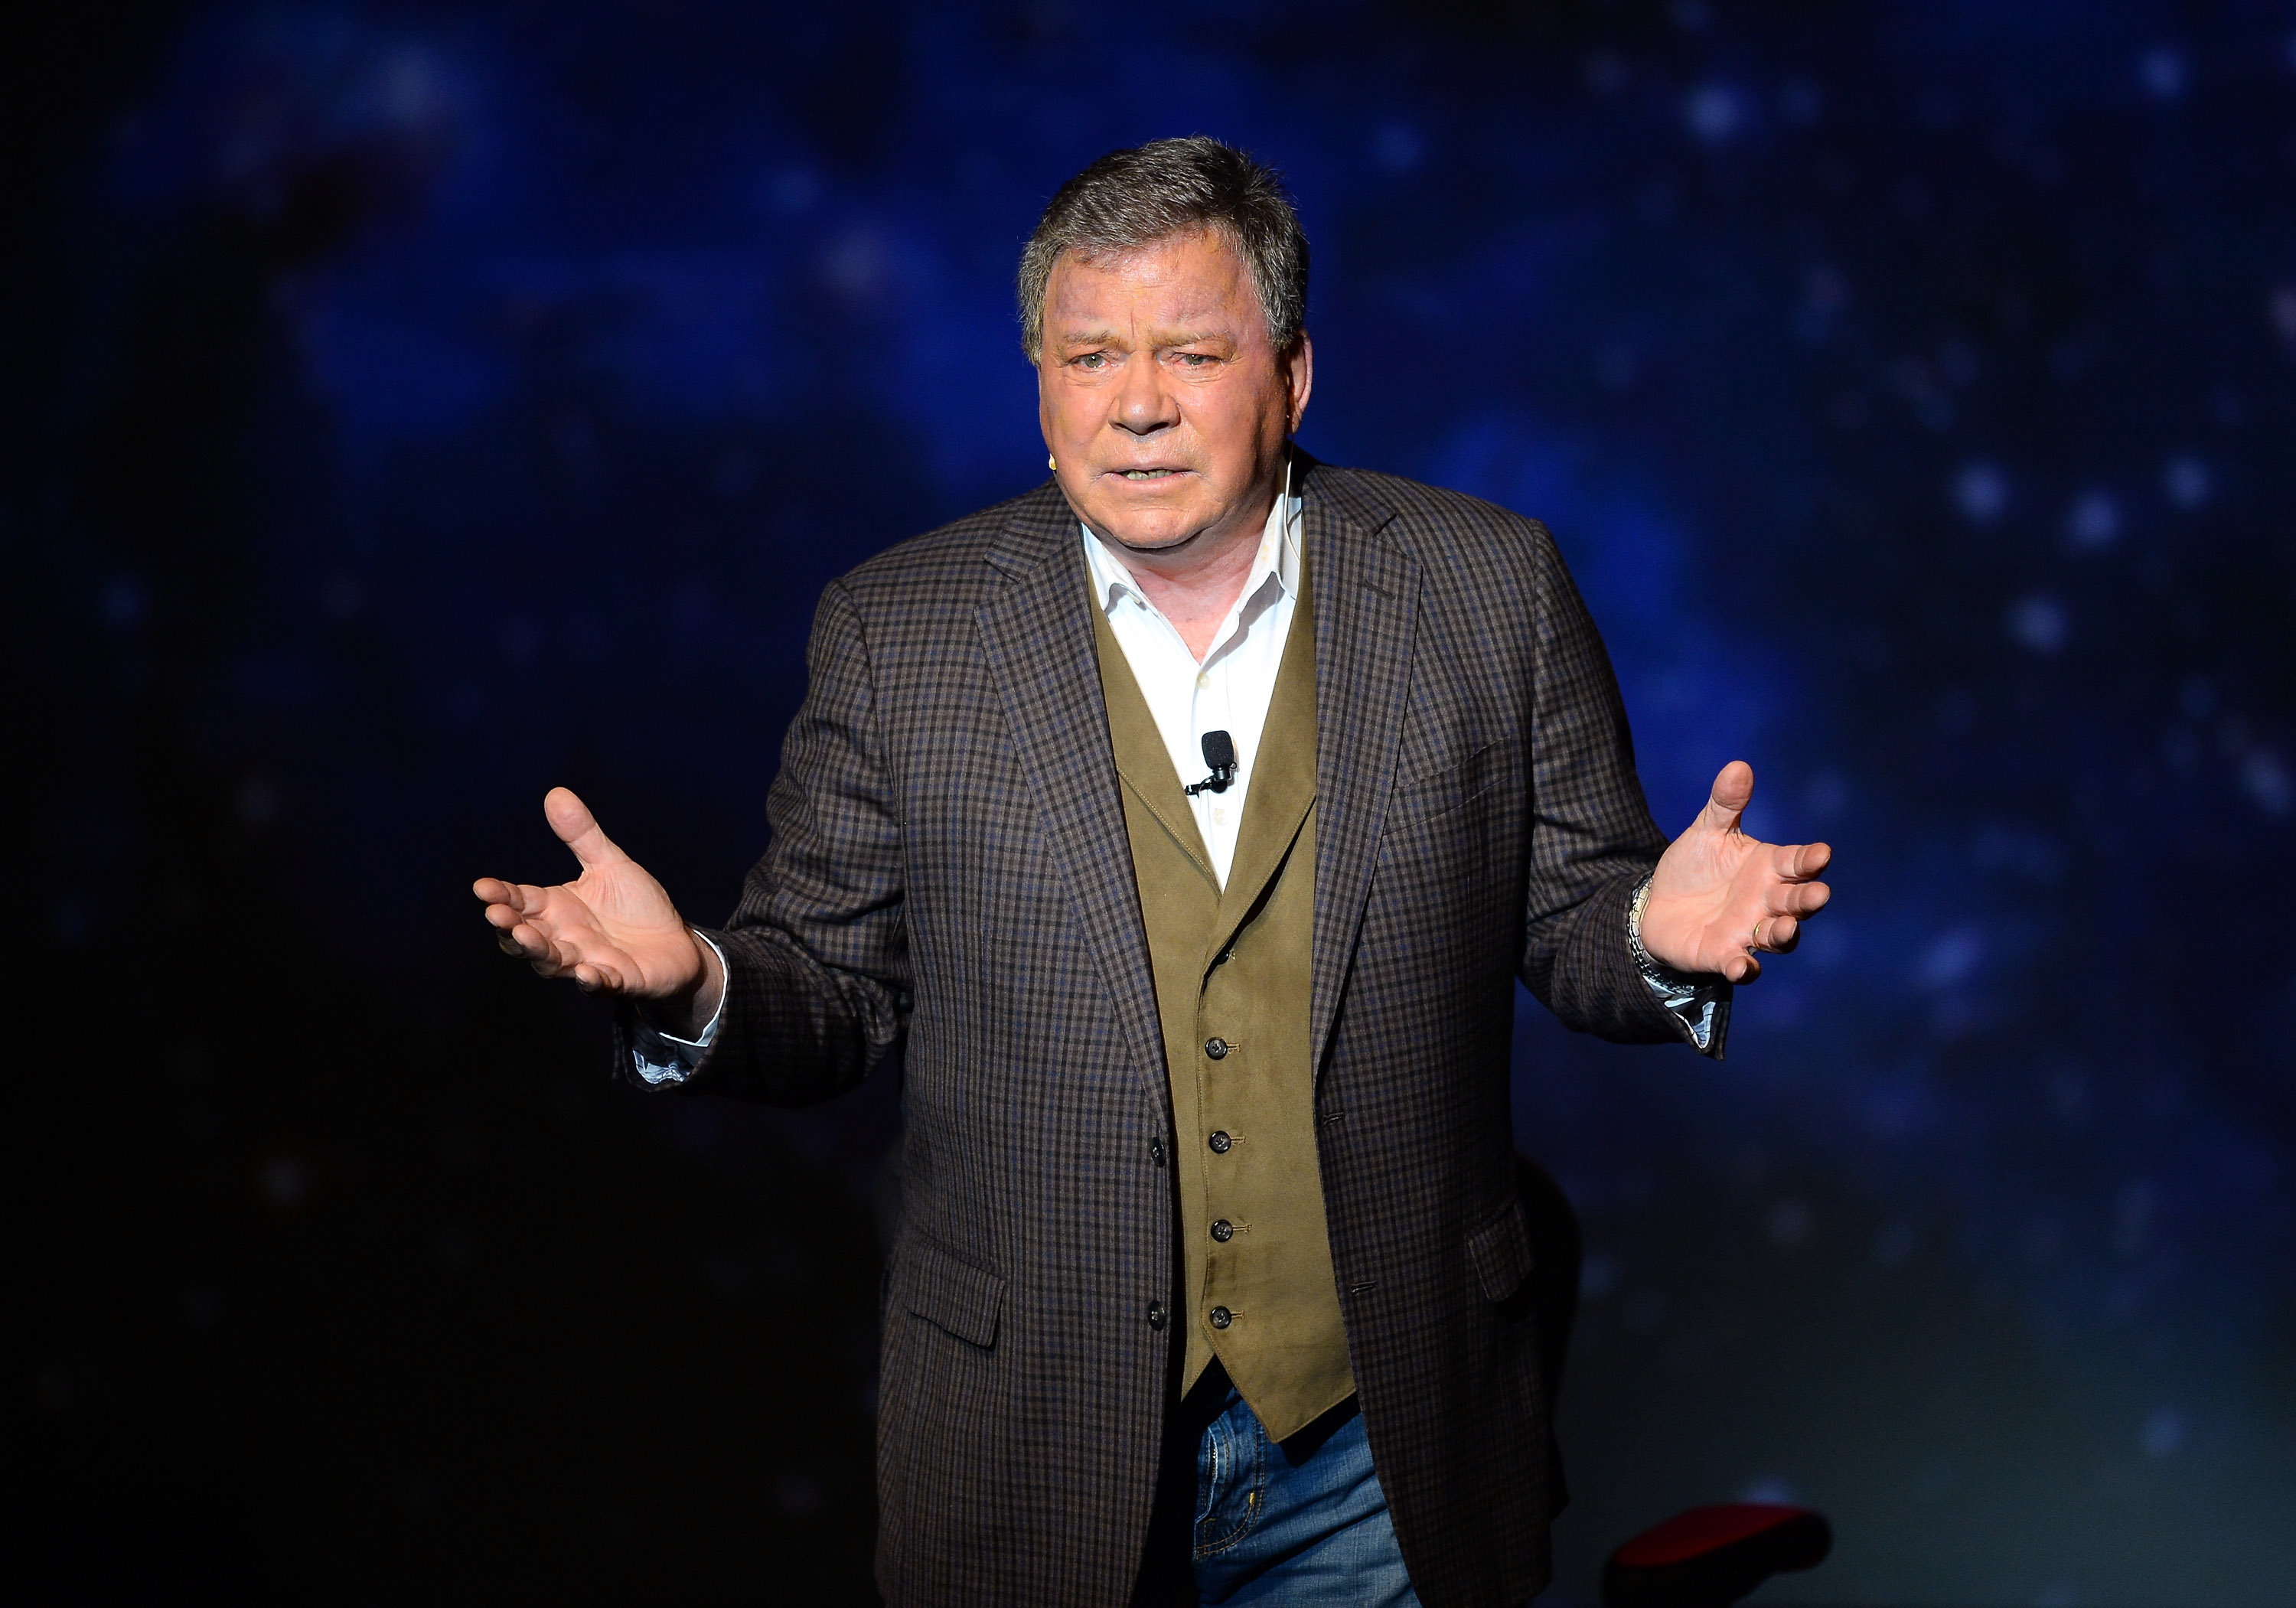 William Shatner performs during his one-man show, "Shatner's World: We Just Live In It," in Las Vegas, Nevada. (Ethan Miller&mdash;Getty Images)